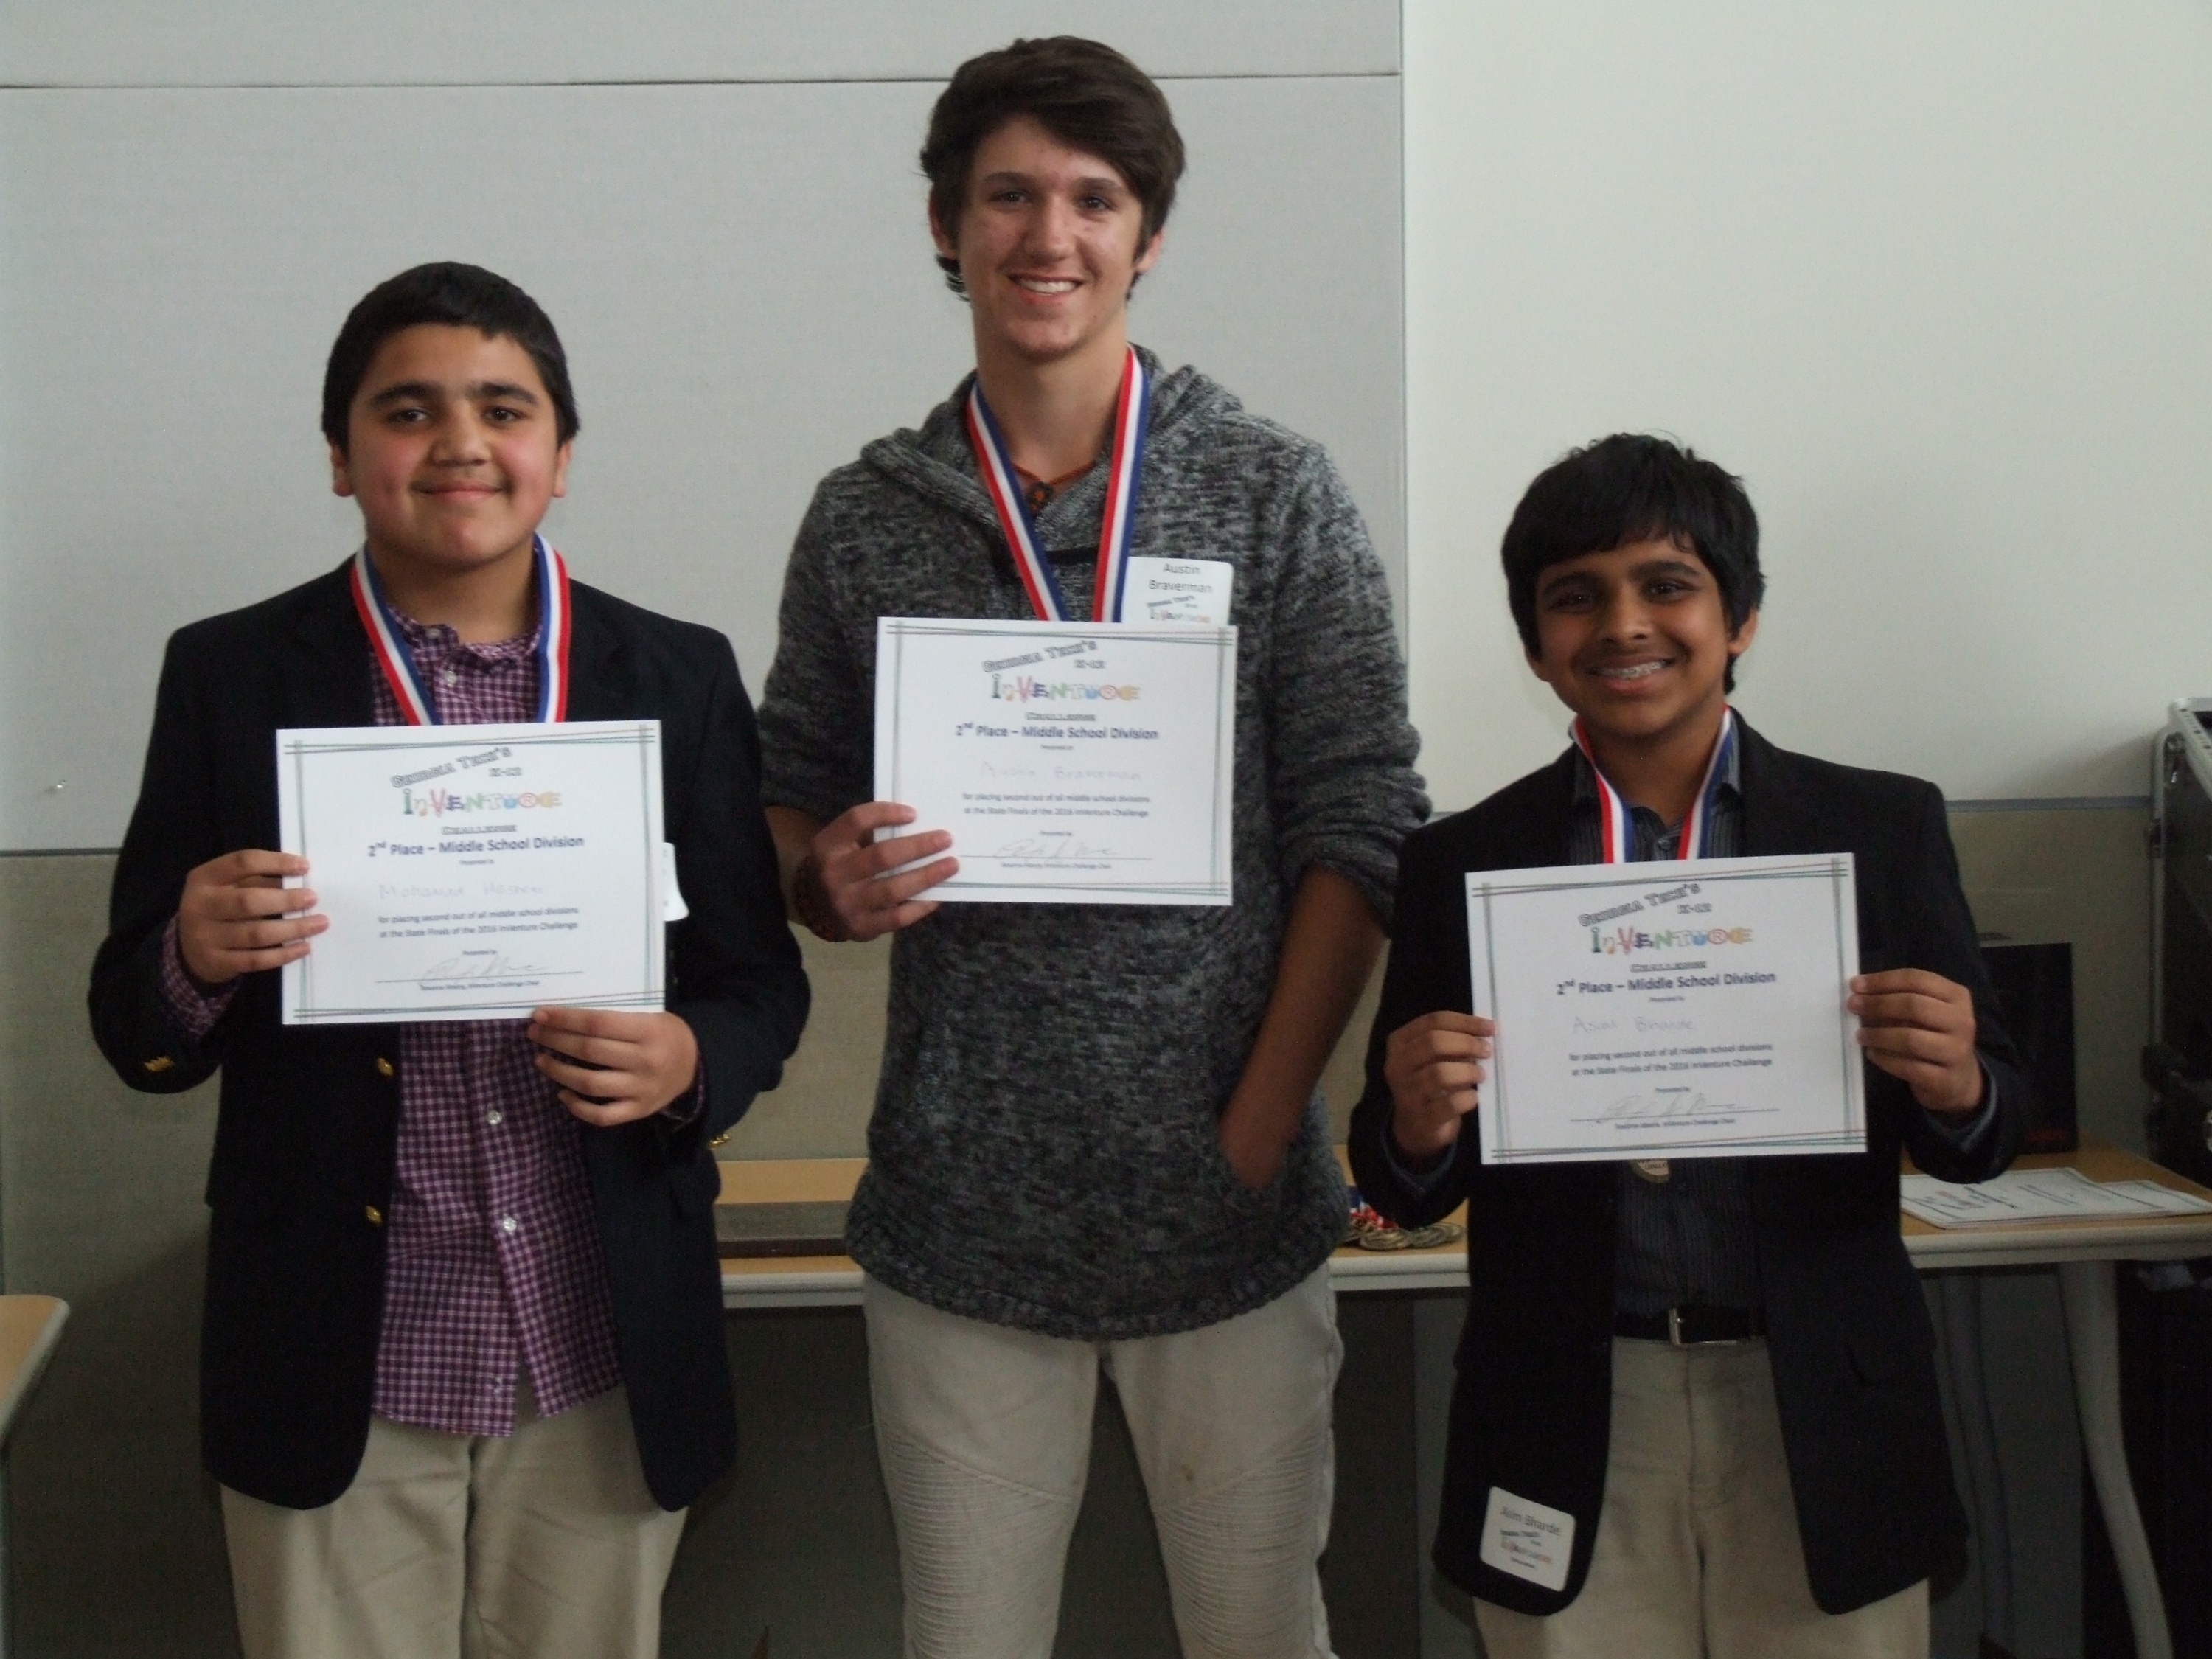 2nd Place Middle School AwardTeam: My Eco Water School: Amana Academy Students: Asim Bharde, Mohamad Hashem, and Austin Braverman